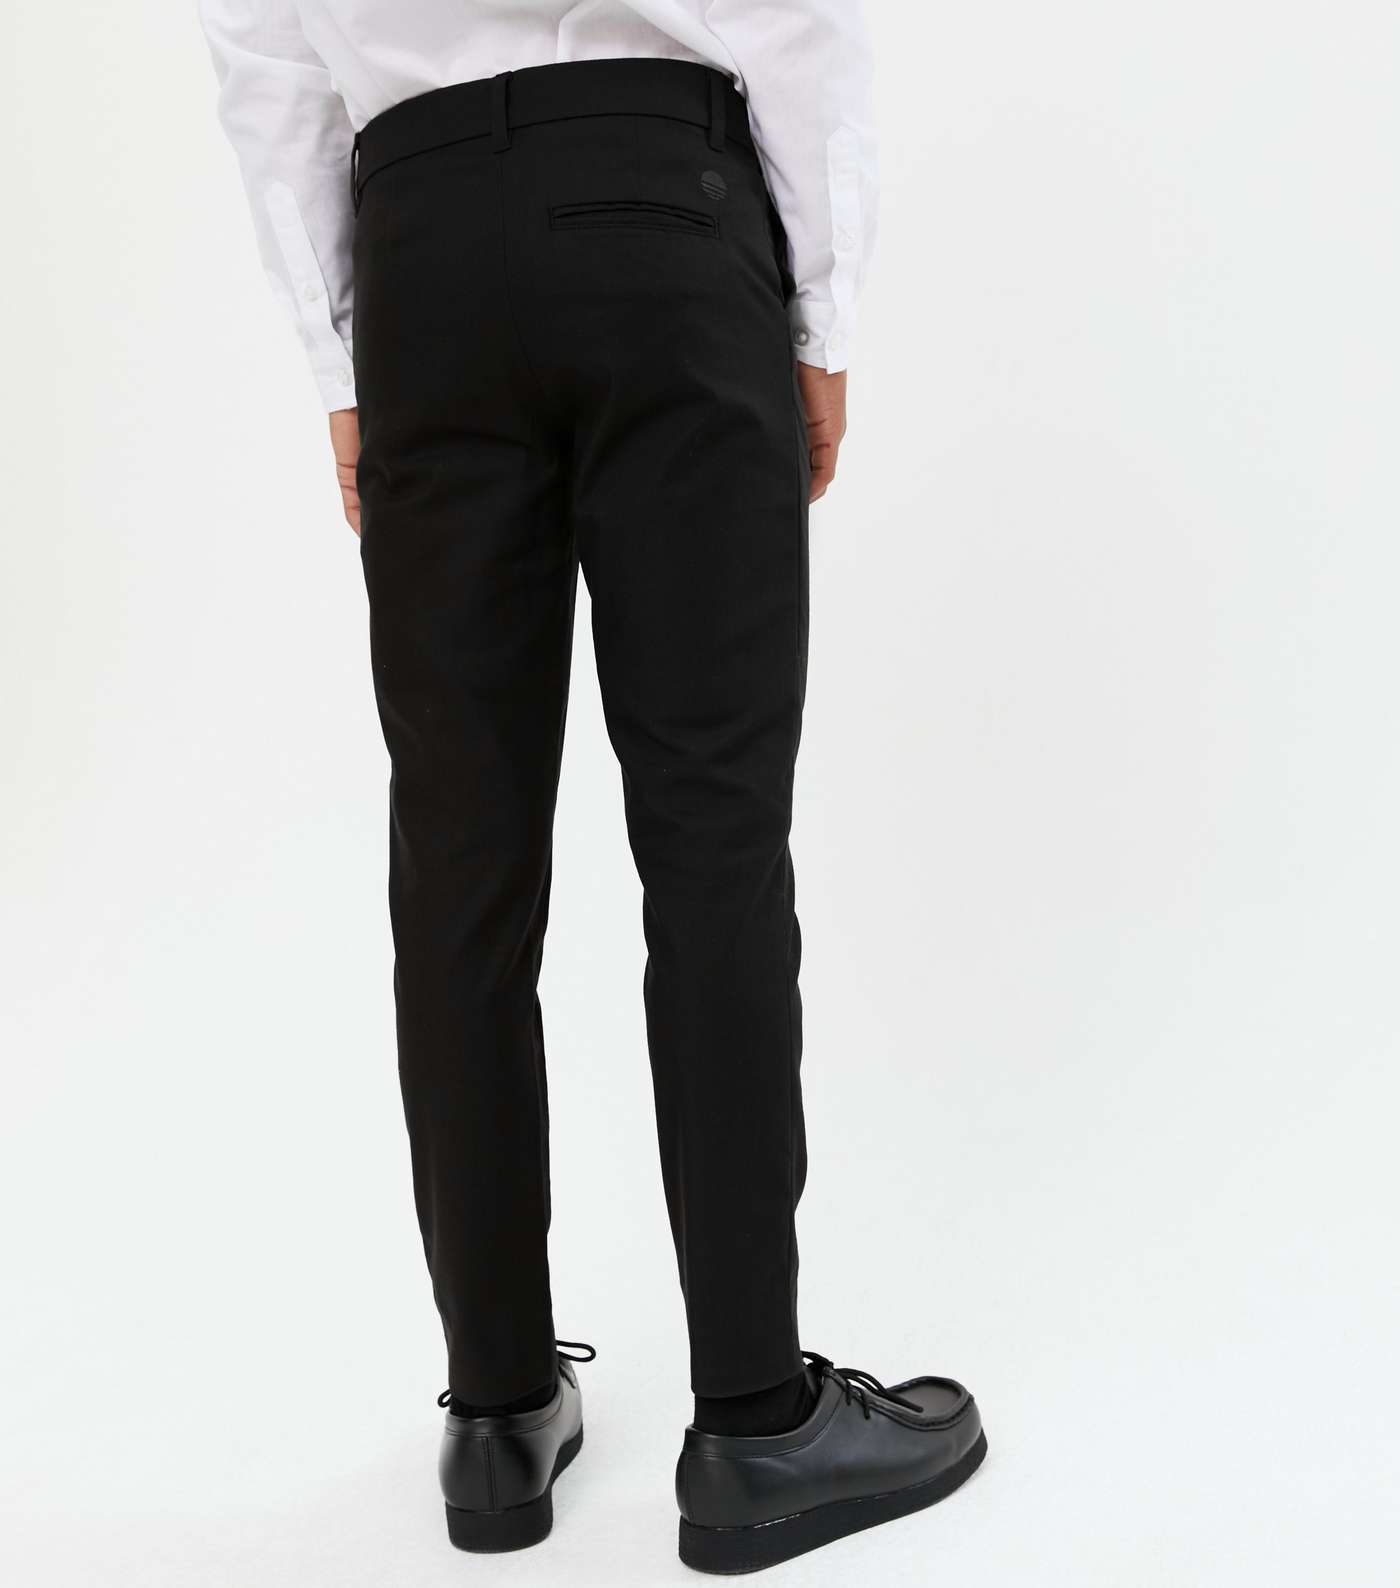 Boys Black Skinny Fit Trousers Image 4